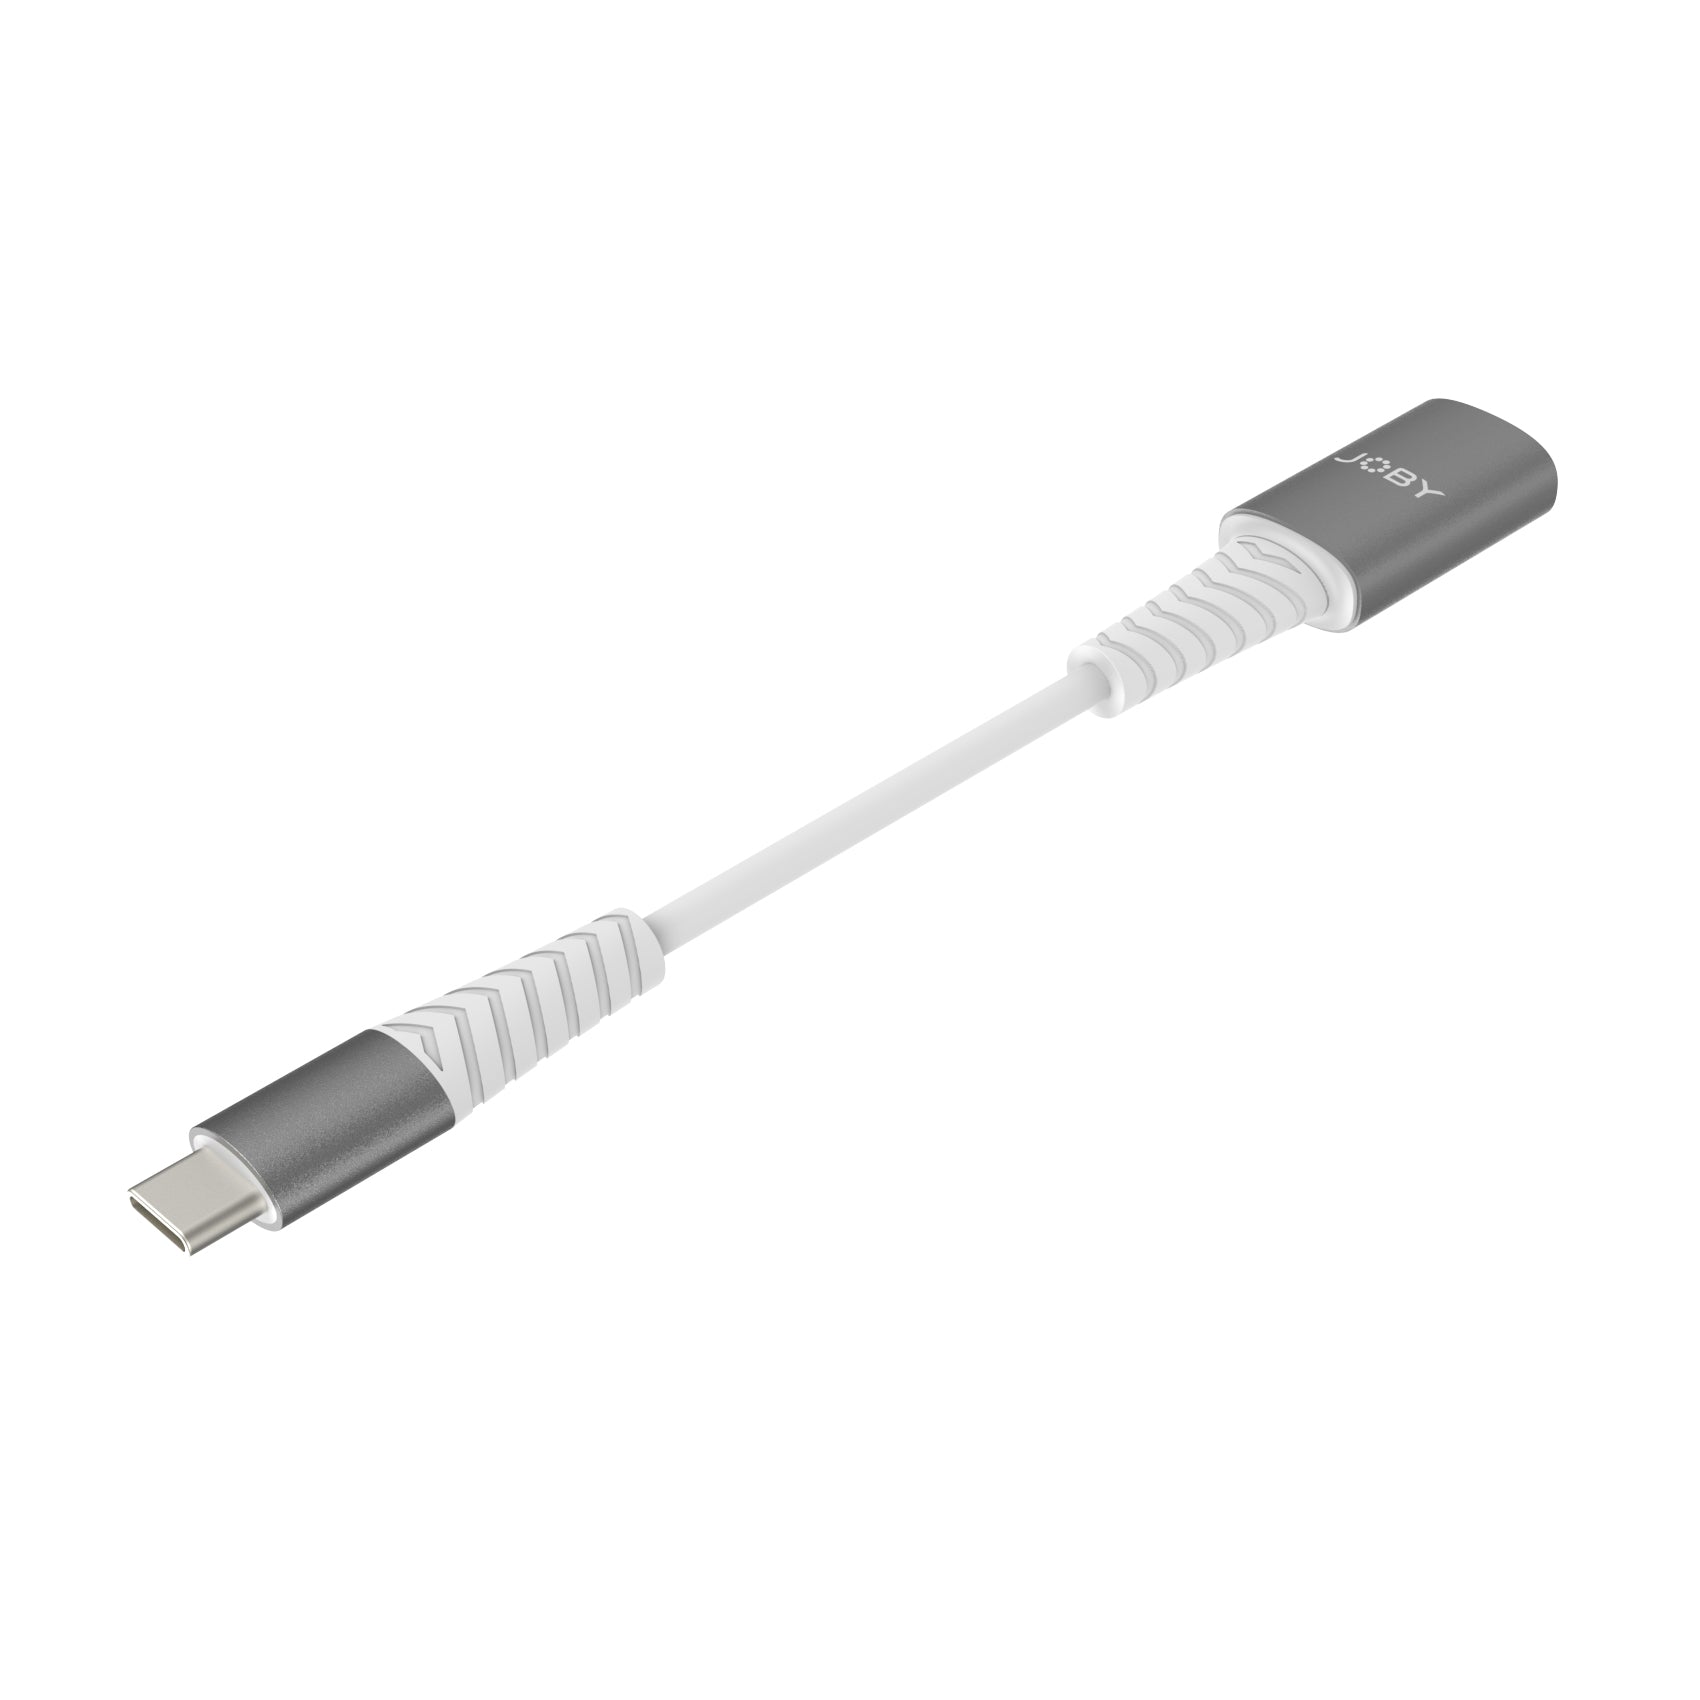 Joby USB-C to USB-A 3.0 Adapter - Space Grey